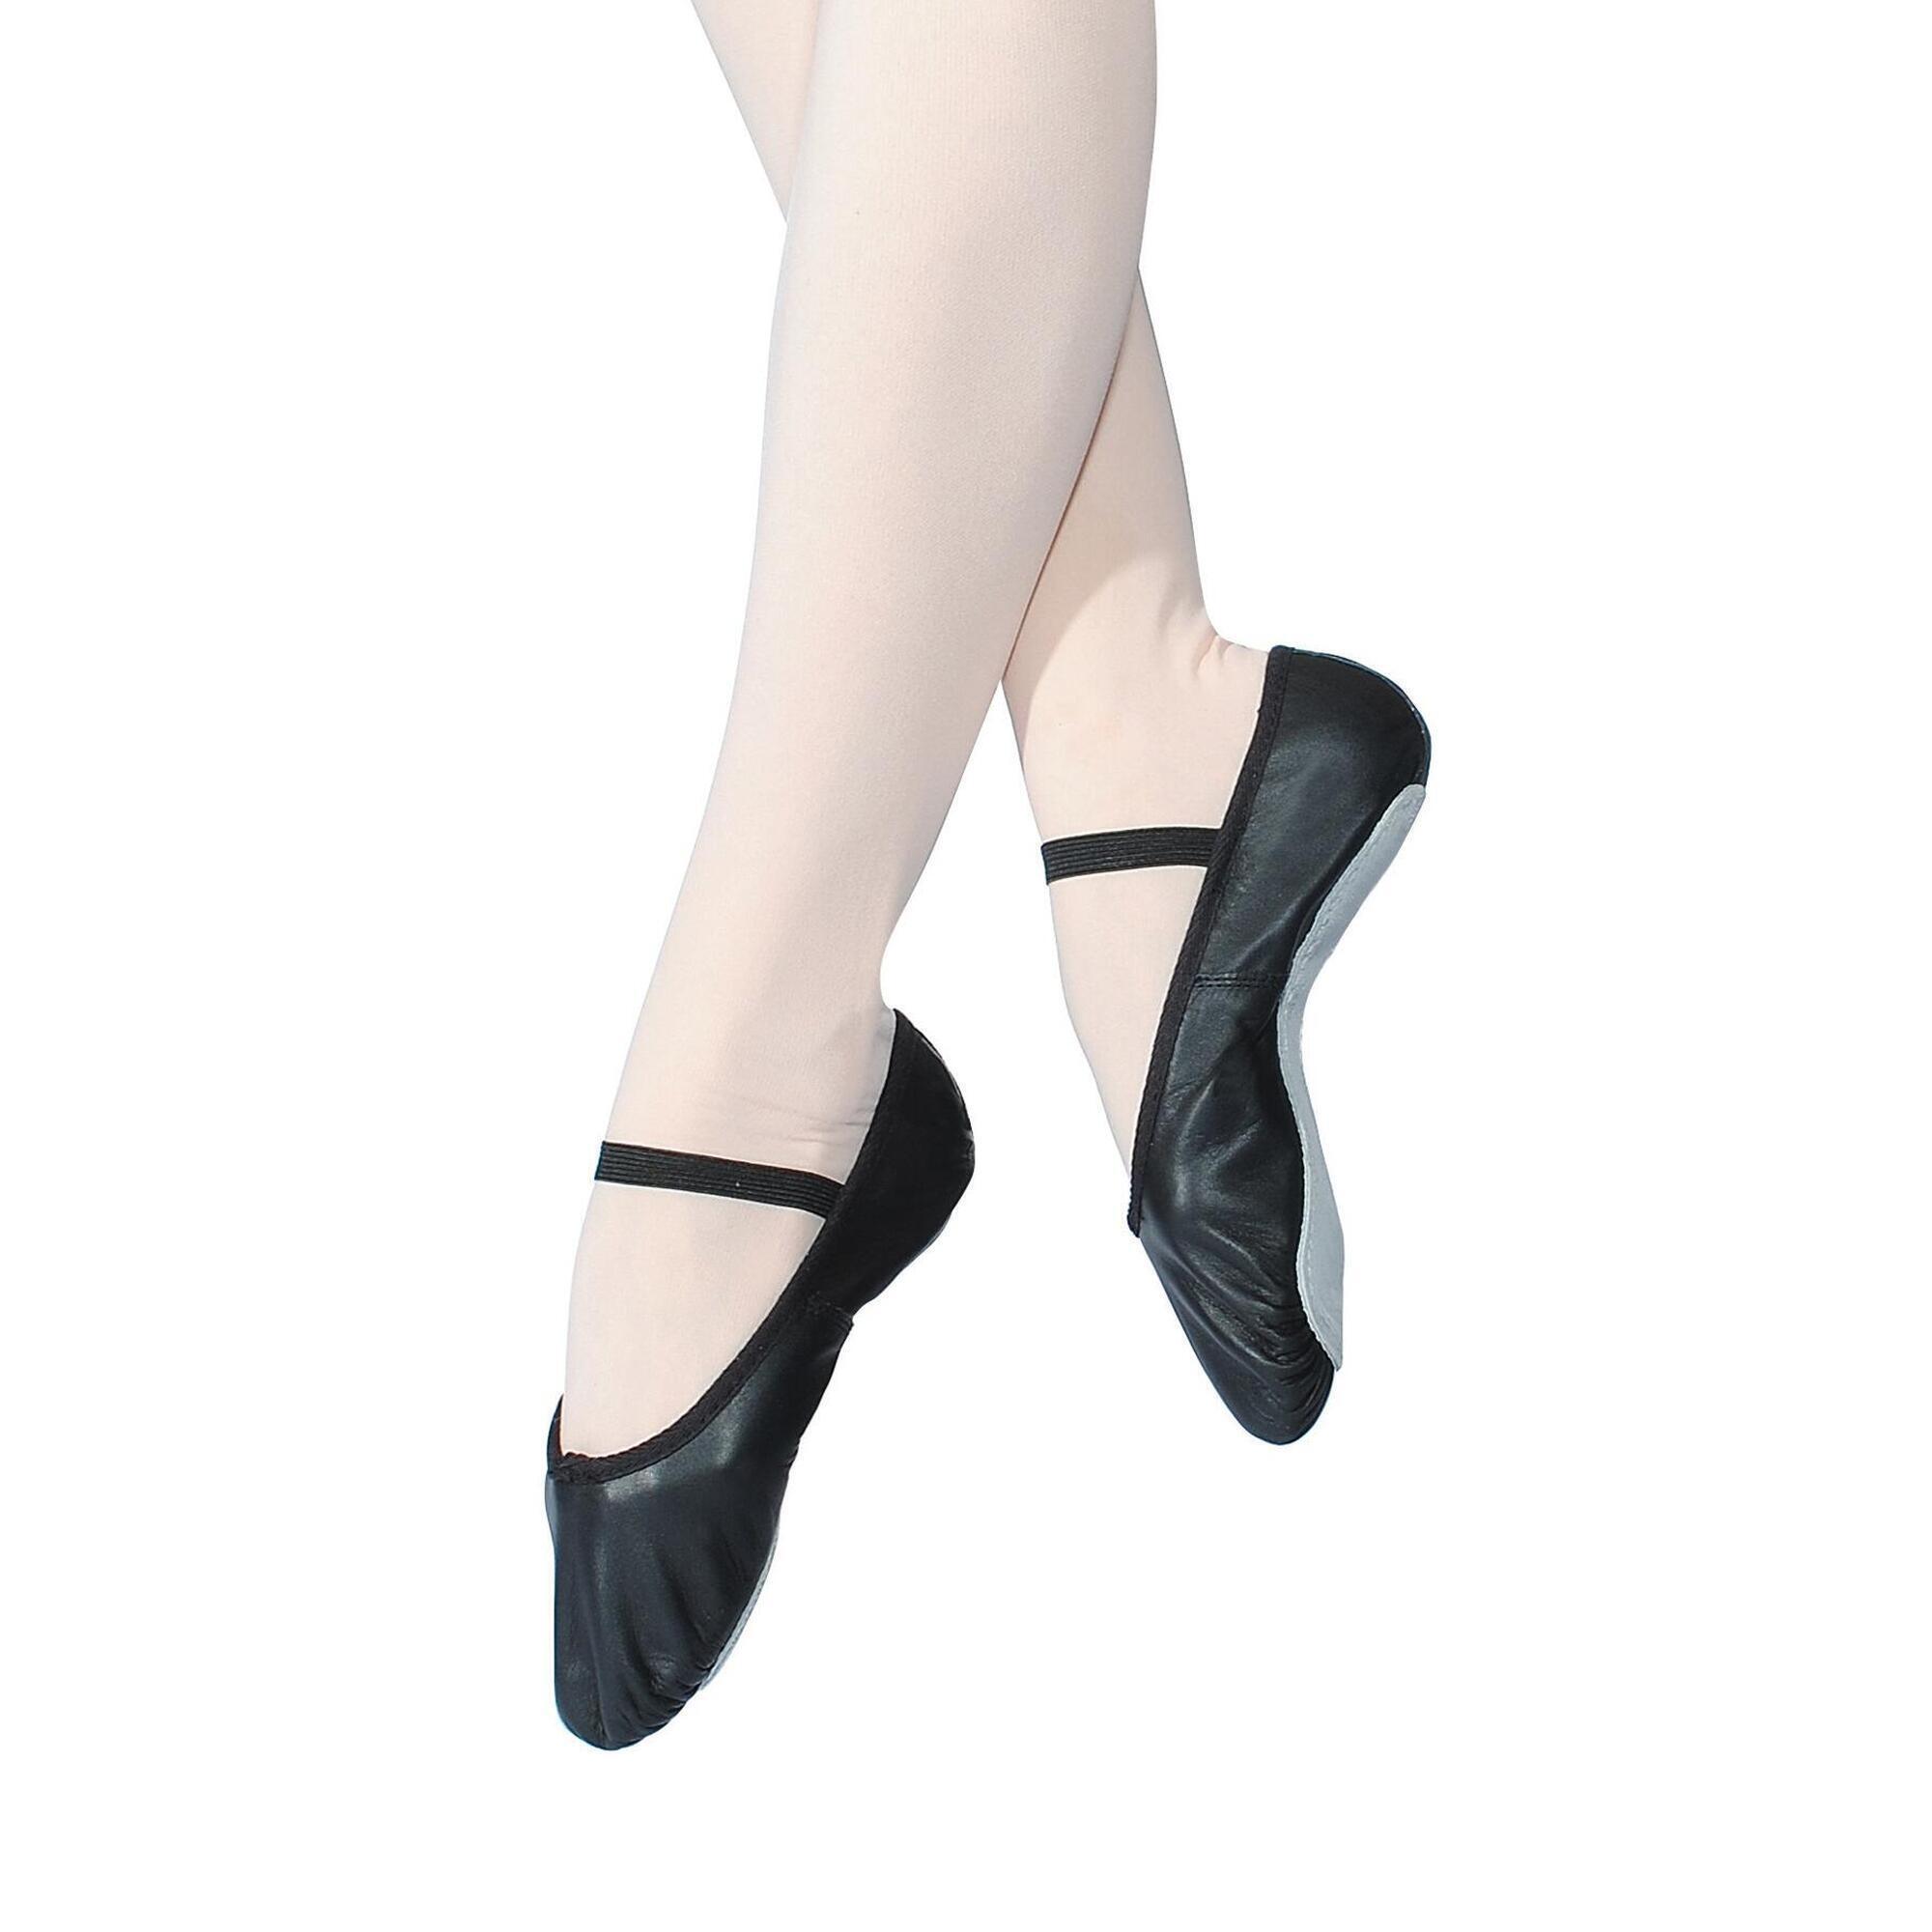 Roch Valley Ophelia Full Sole Leather Ballet Shoes Black ROCH